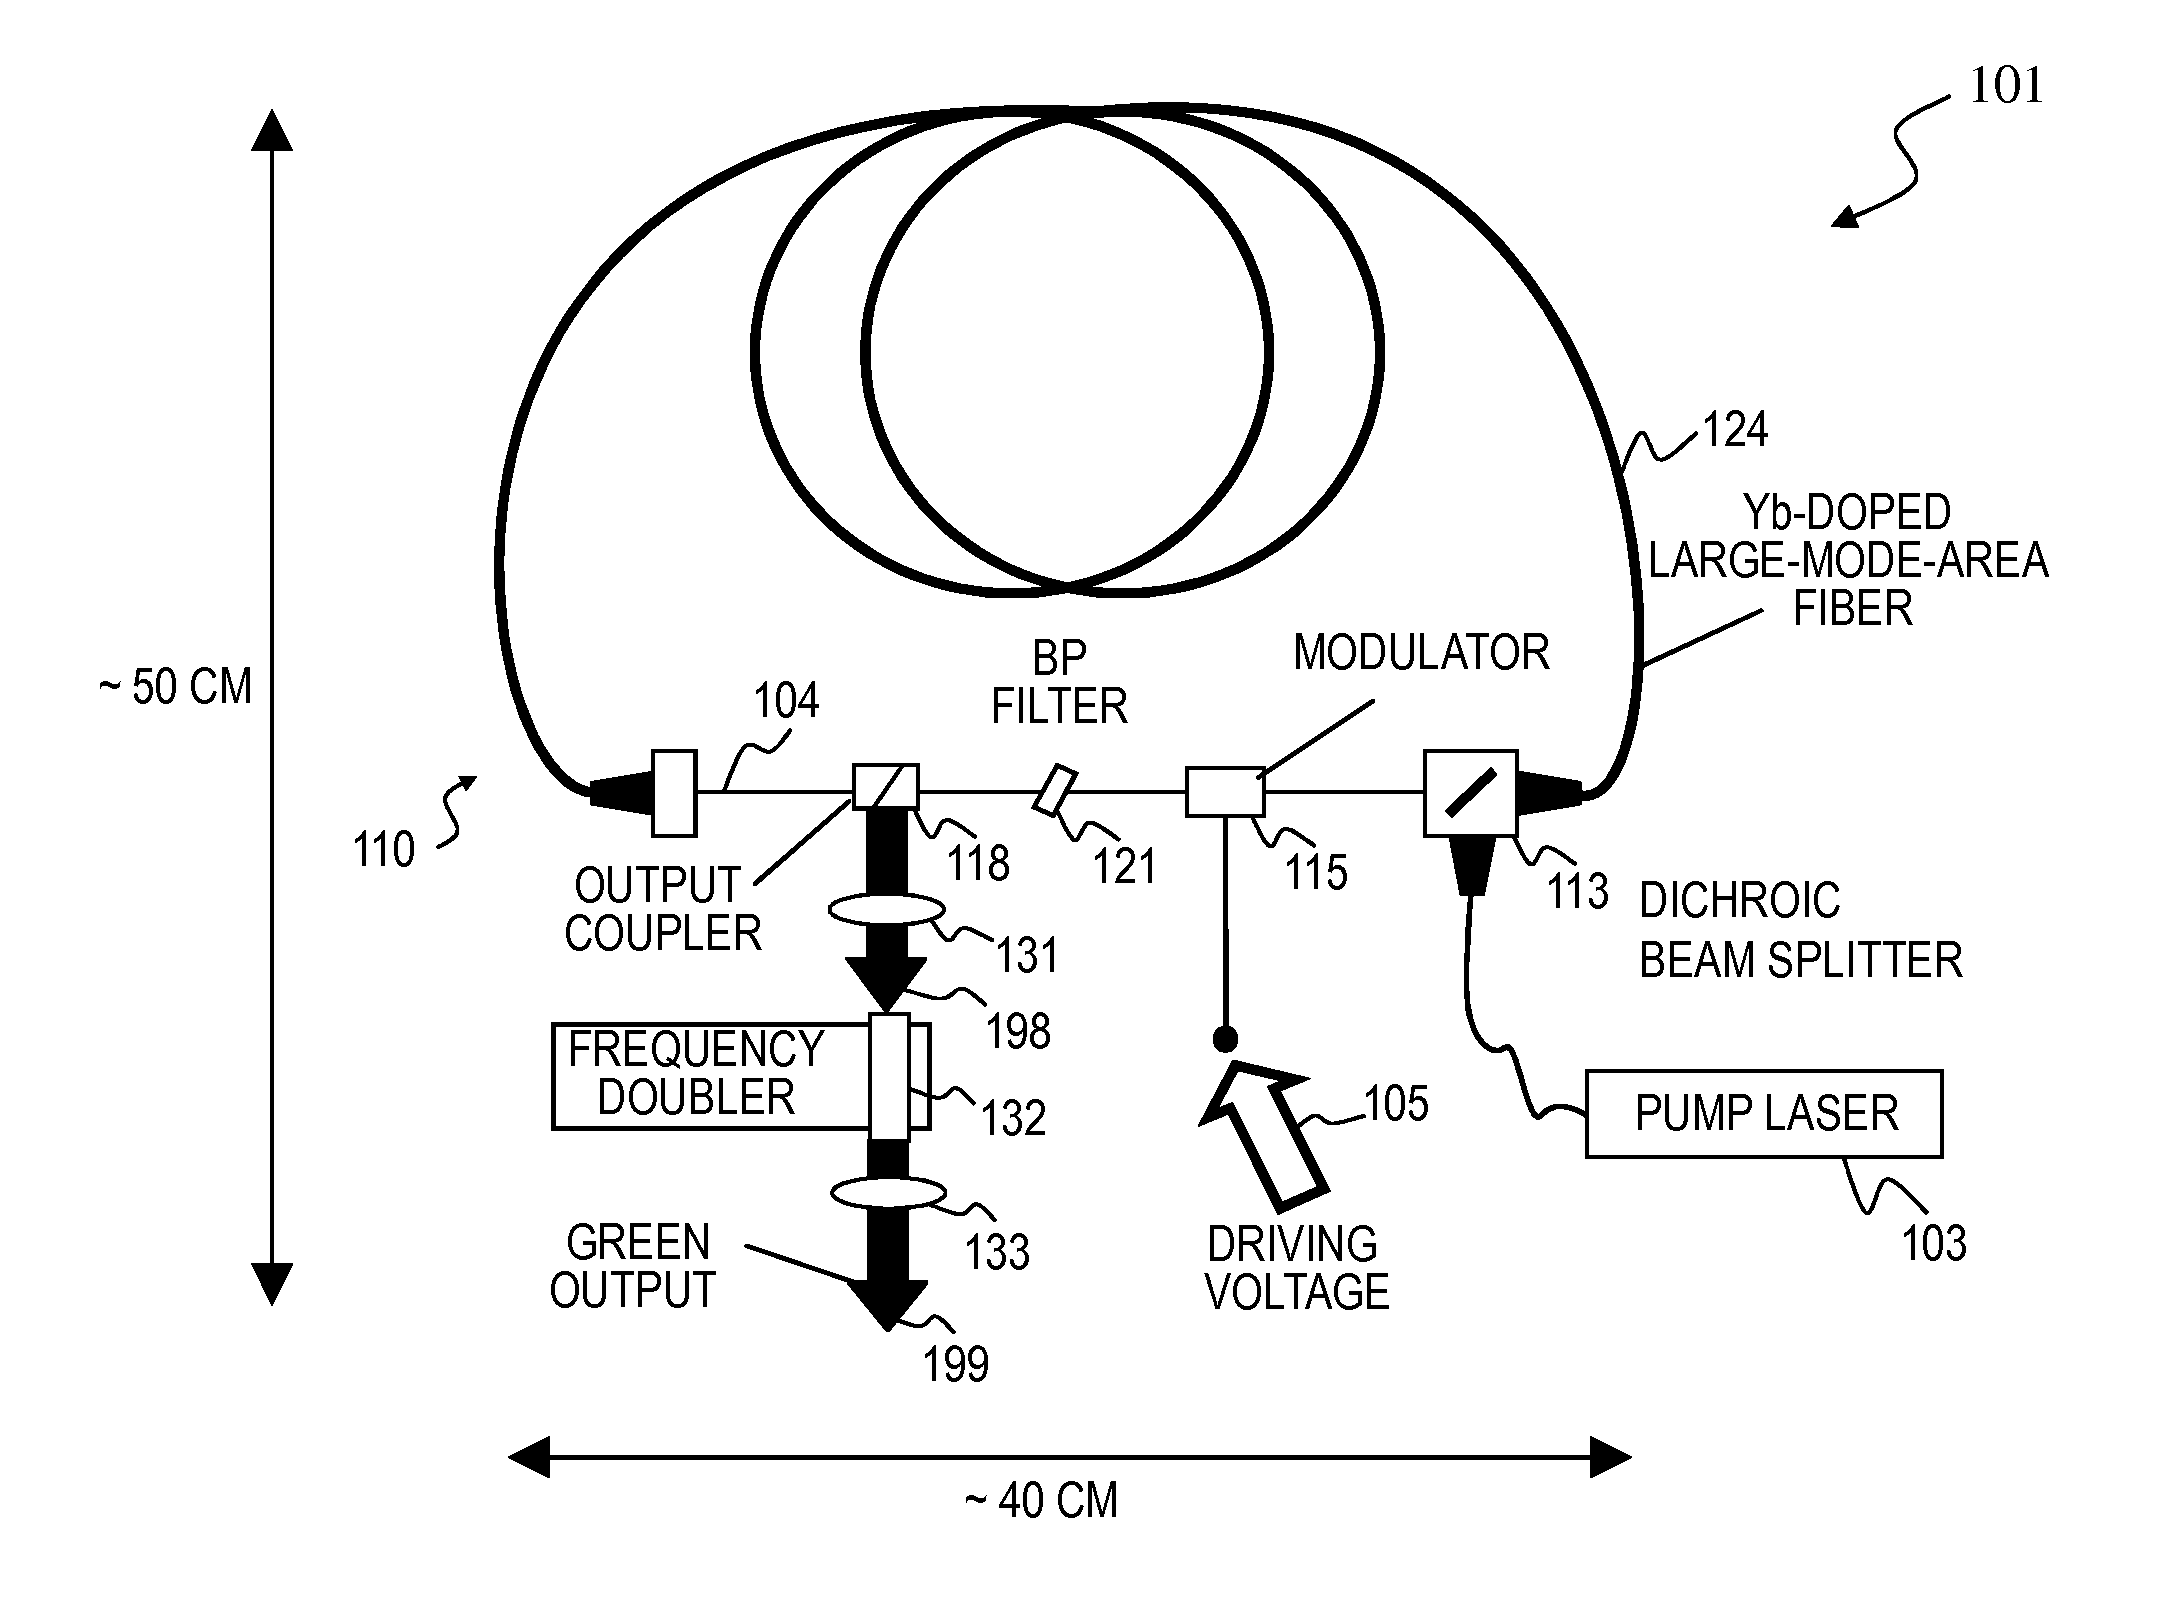 System and method for high-power, pulsed ring fiber oscillator